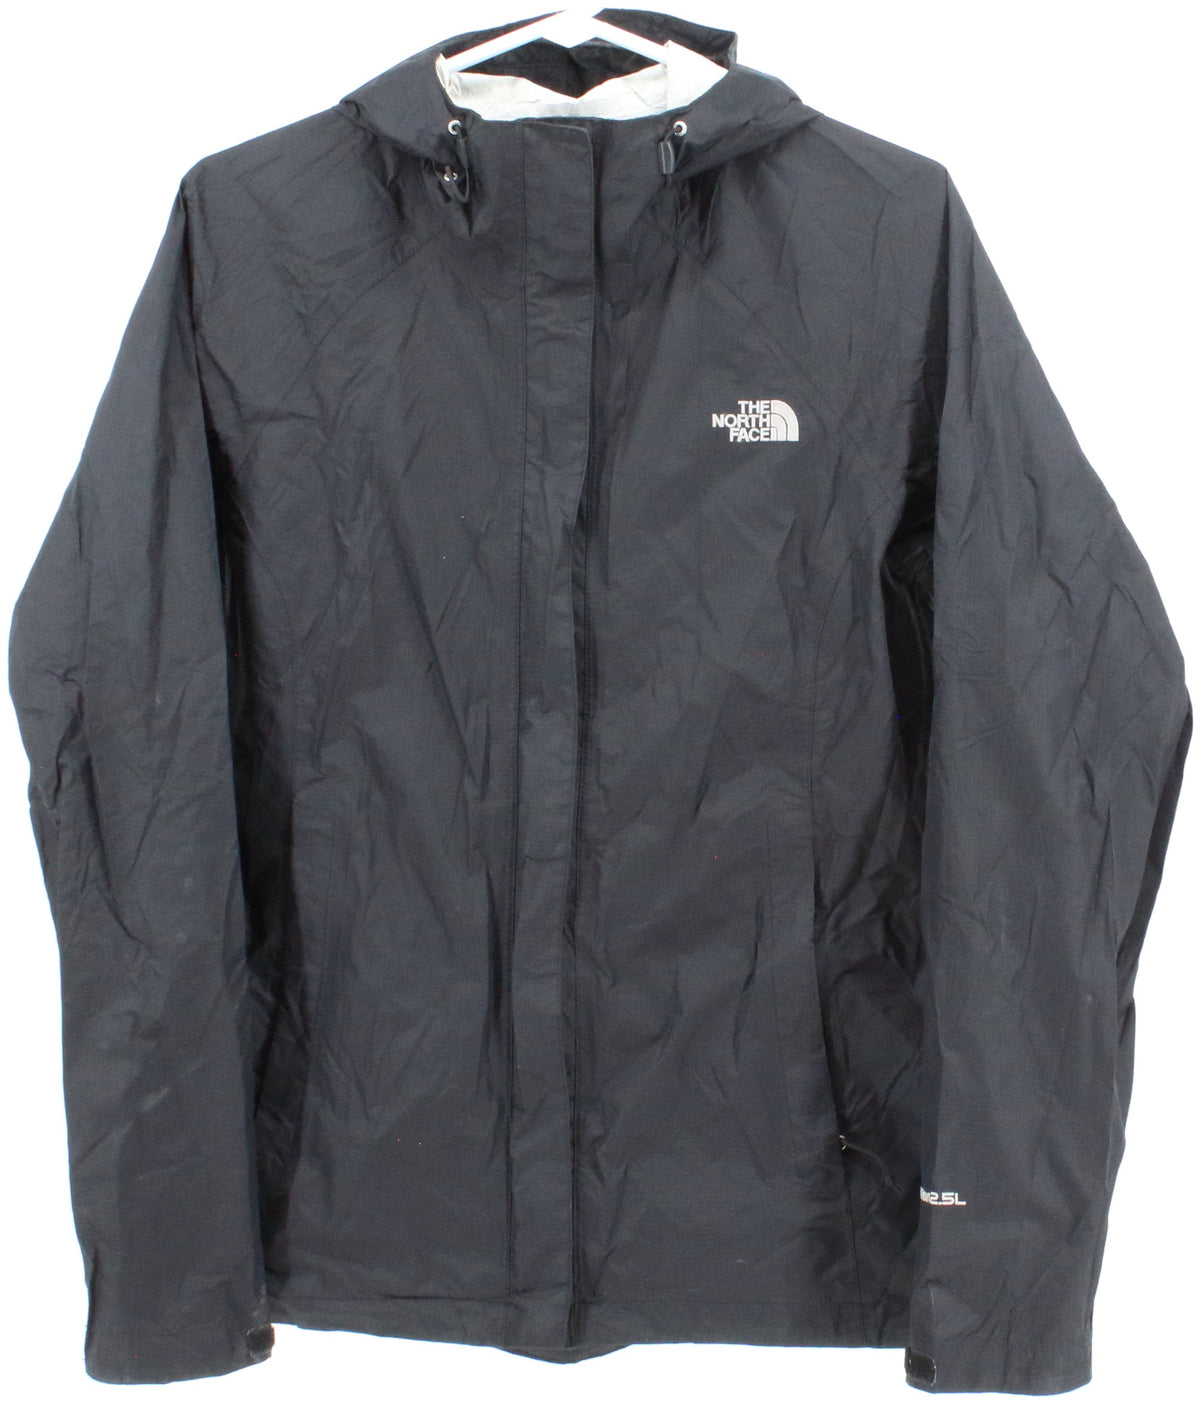 The North Face HyVent 2.5L Black Women's Jacket